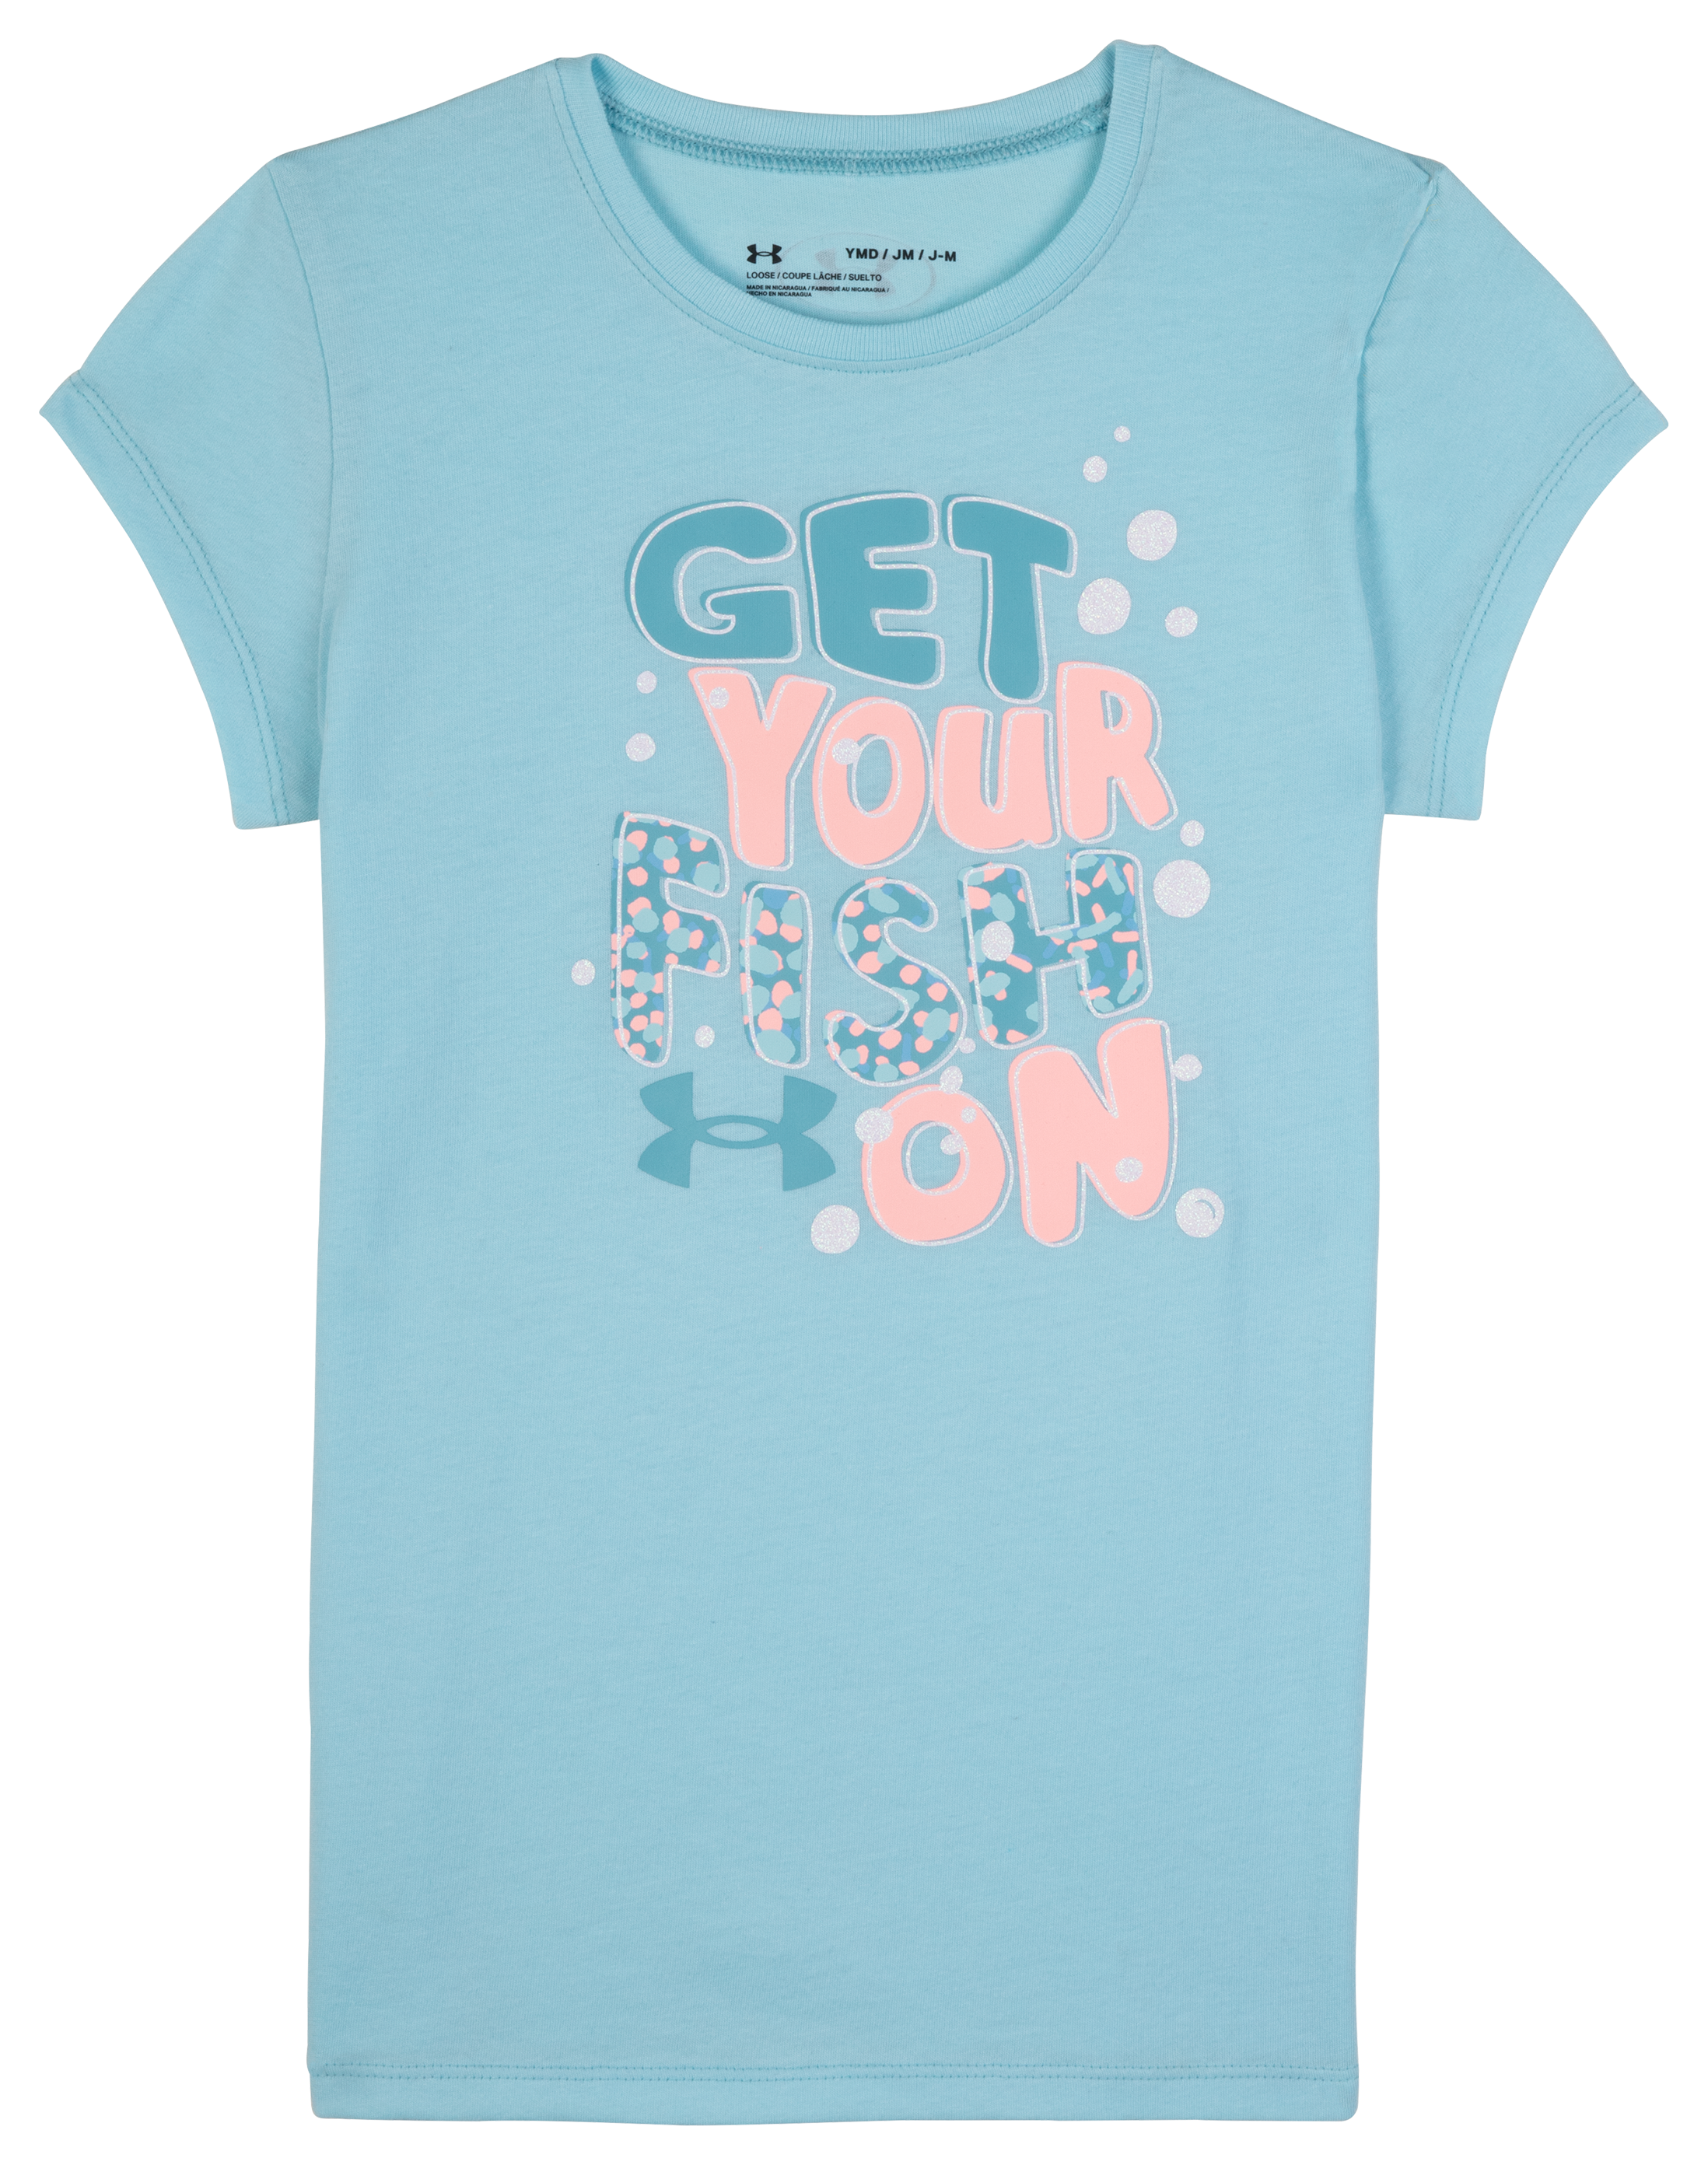 Under Armour Get Your Fish On Short-Sleeve T-Shirt for Girls